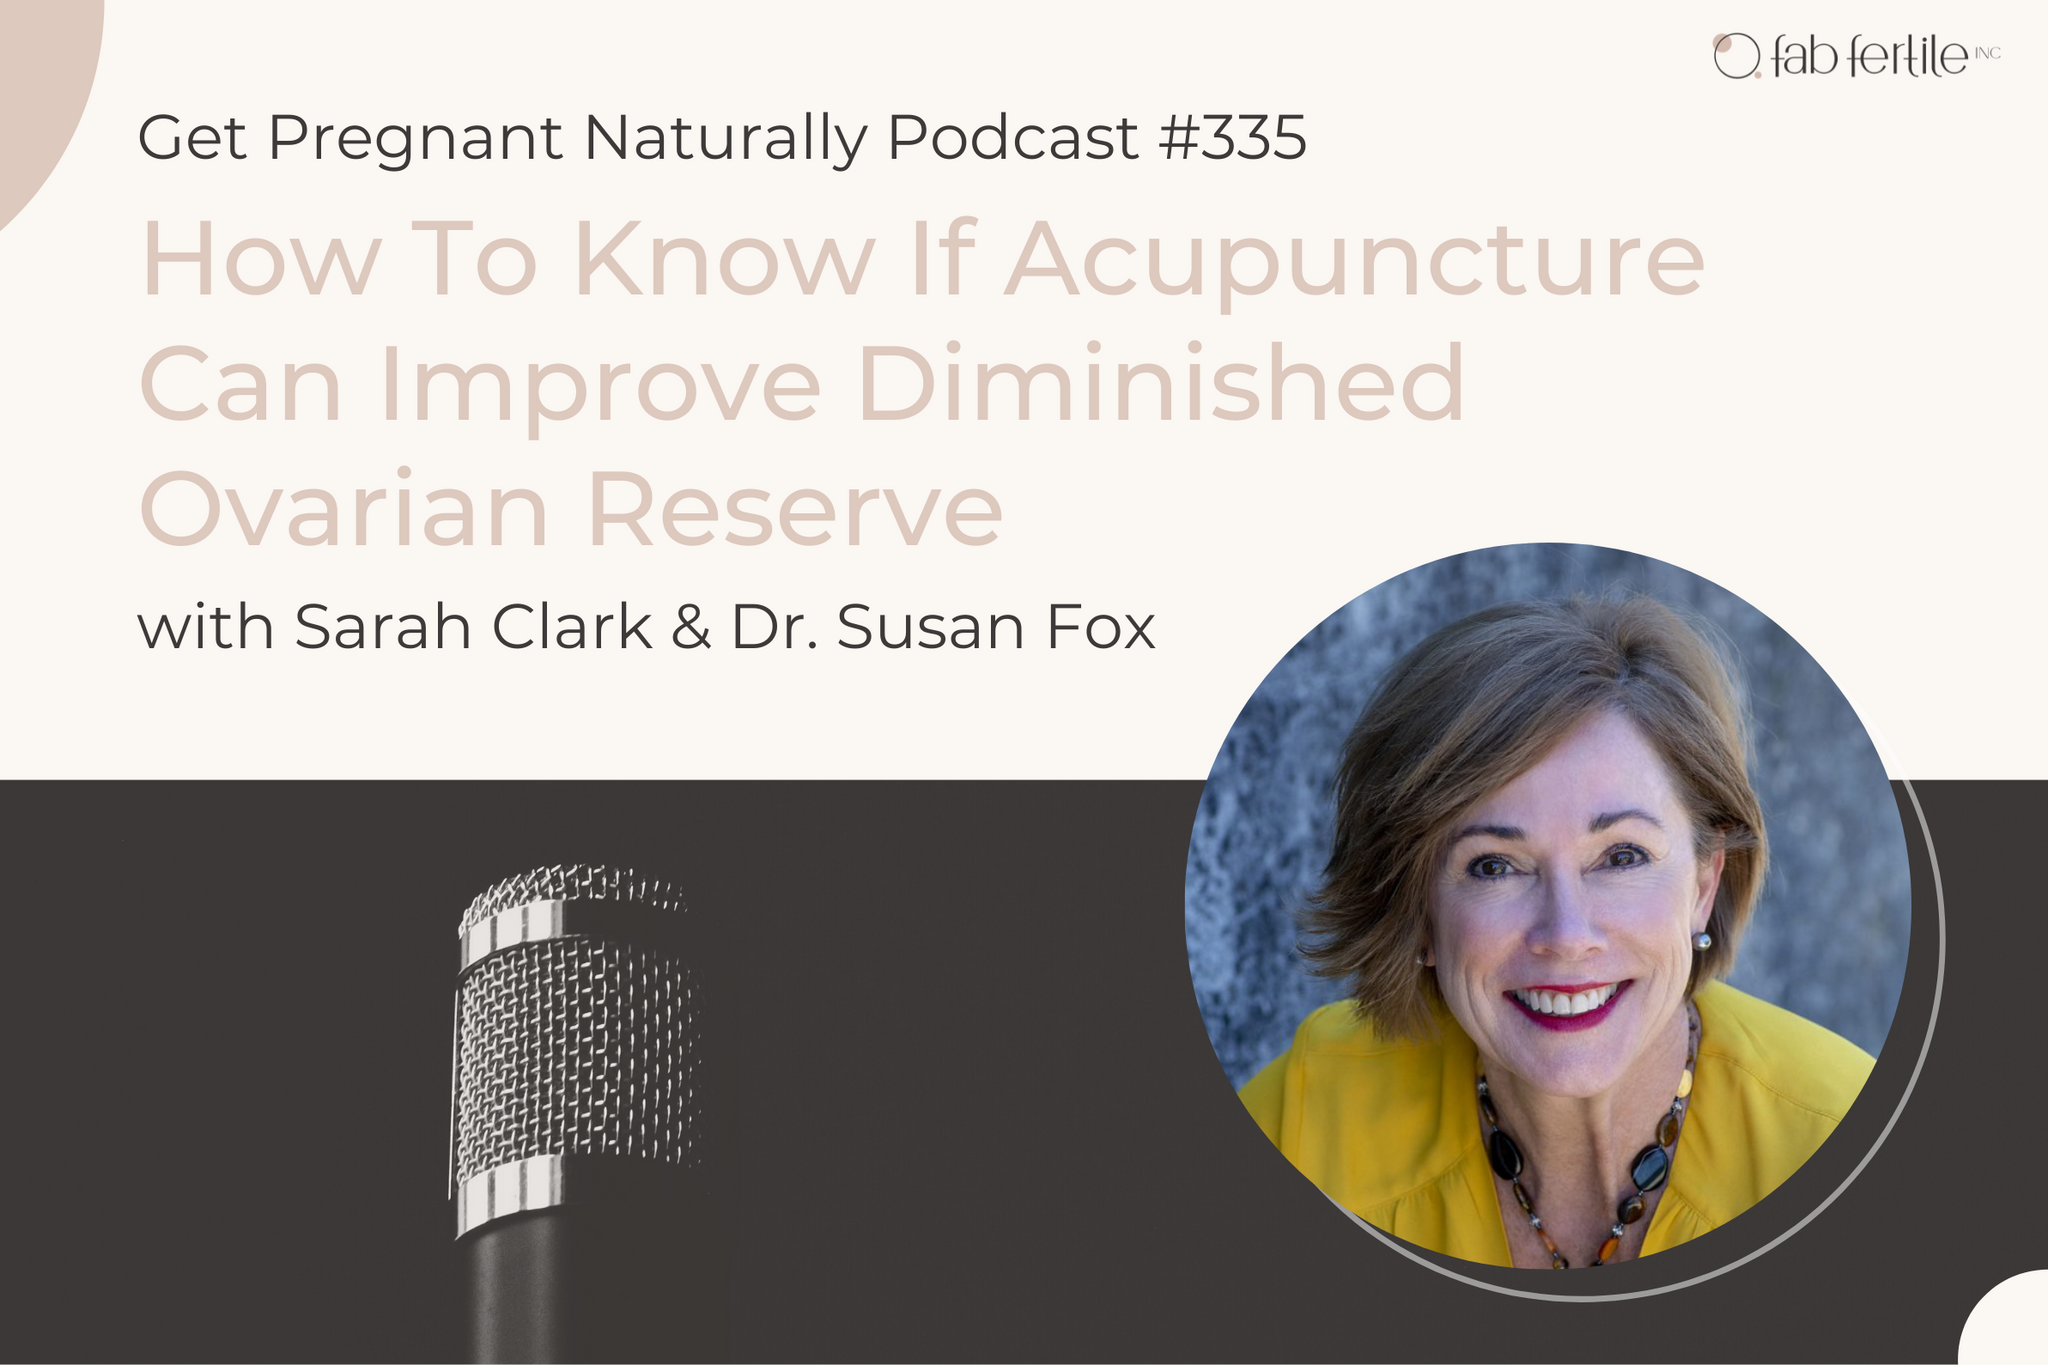 How To Know If Acupuncture Can Improve Diminished Ovarian Reserve